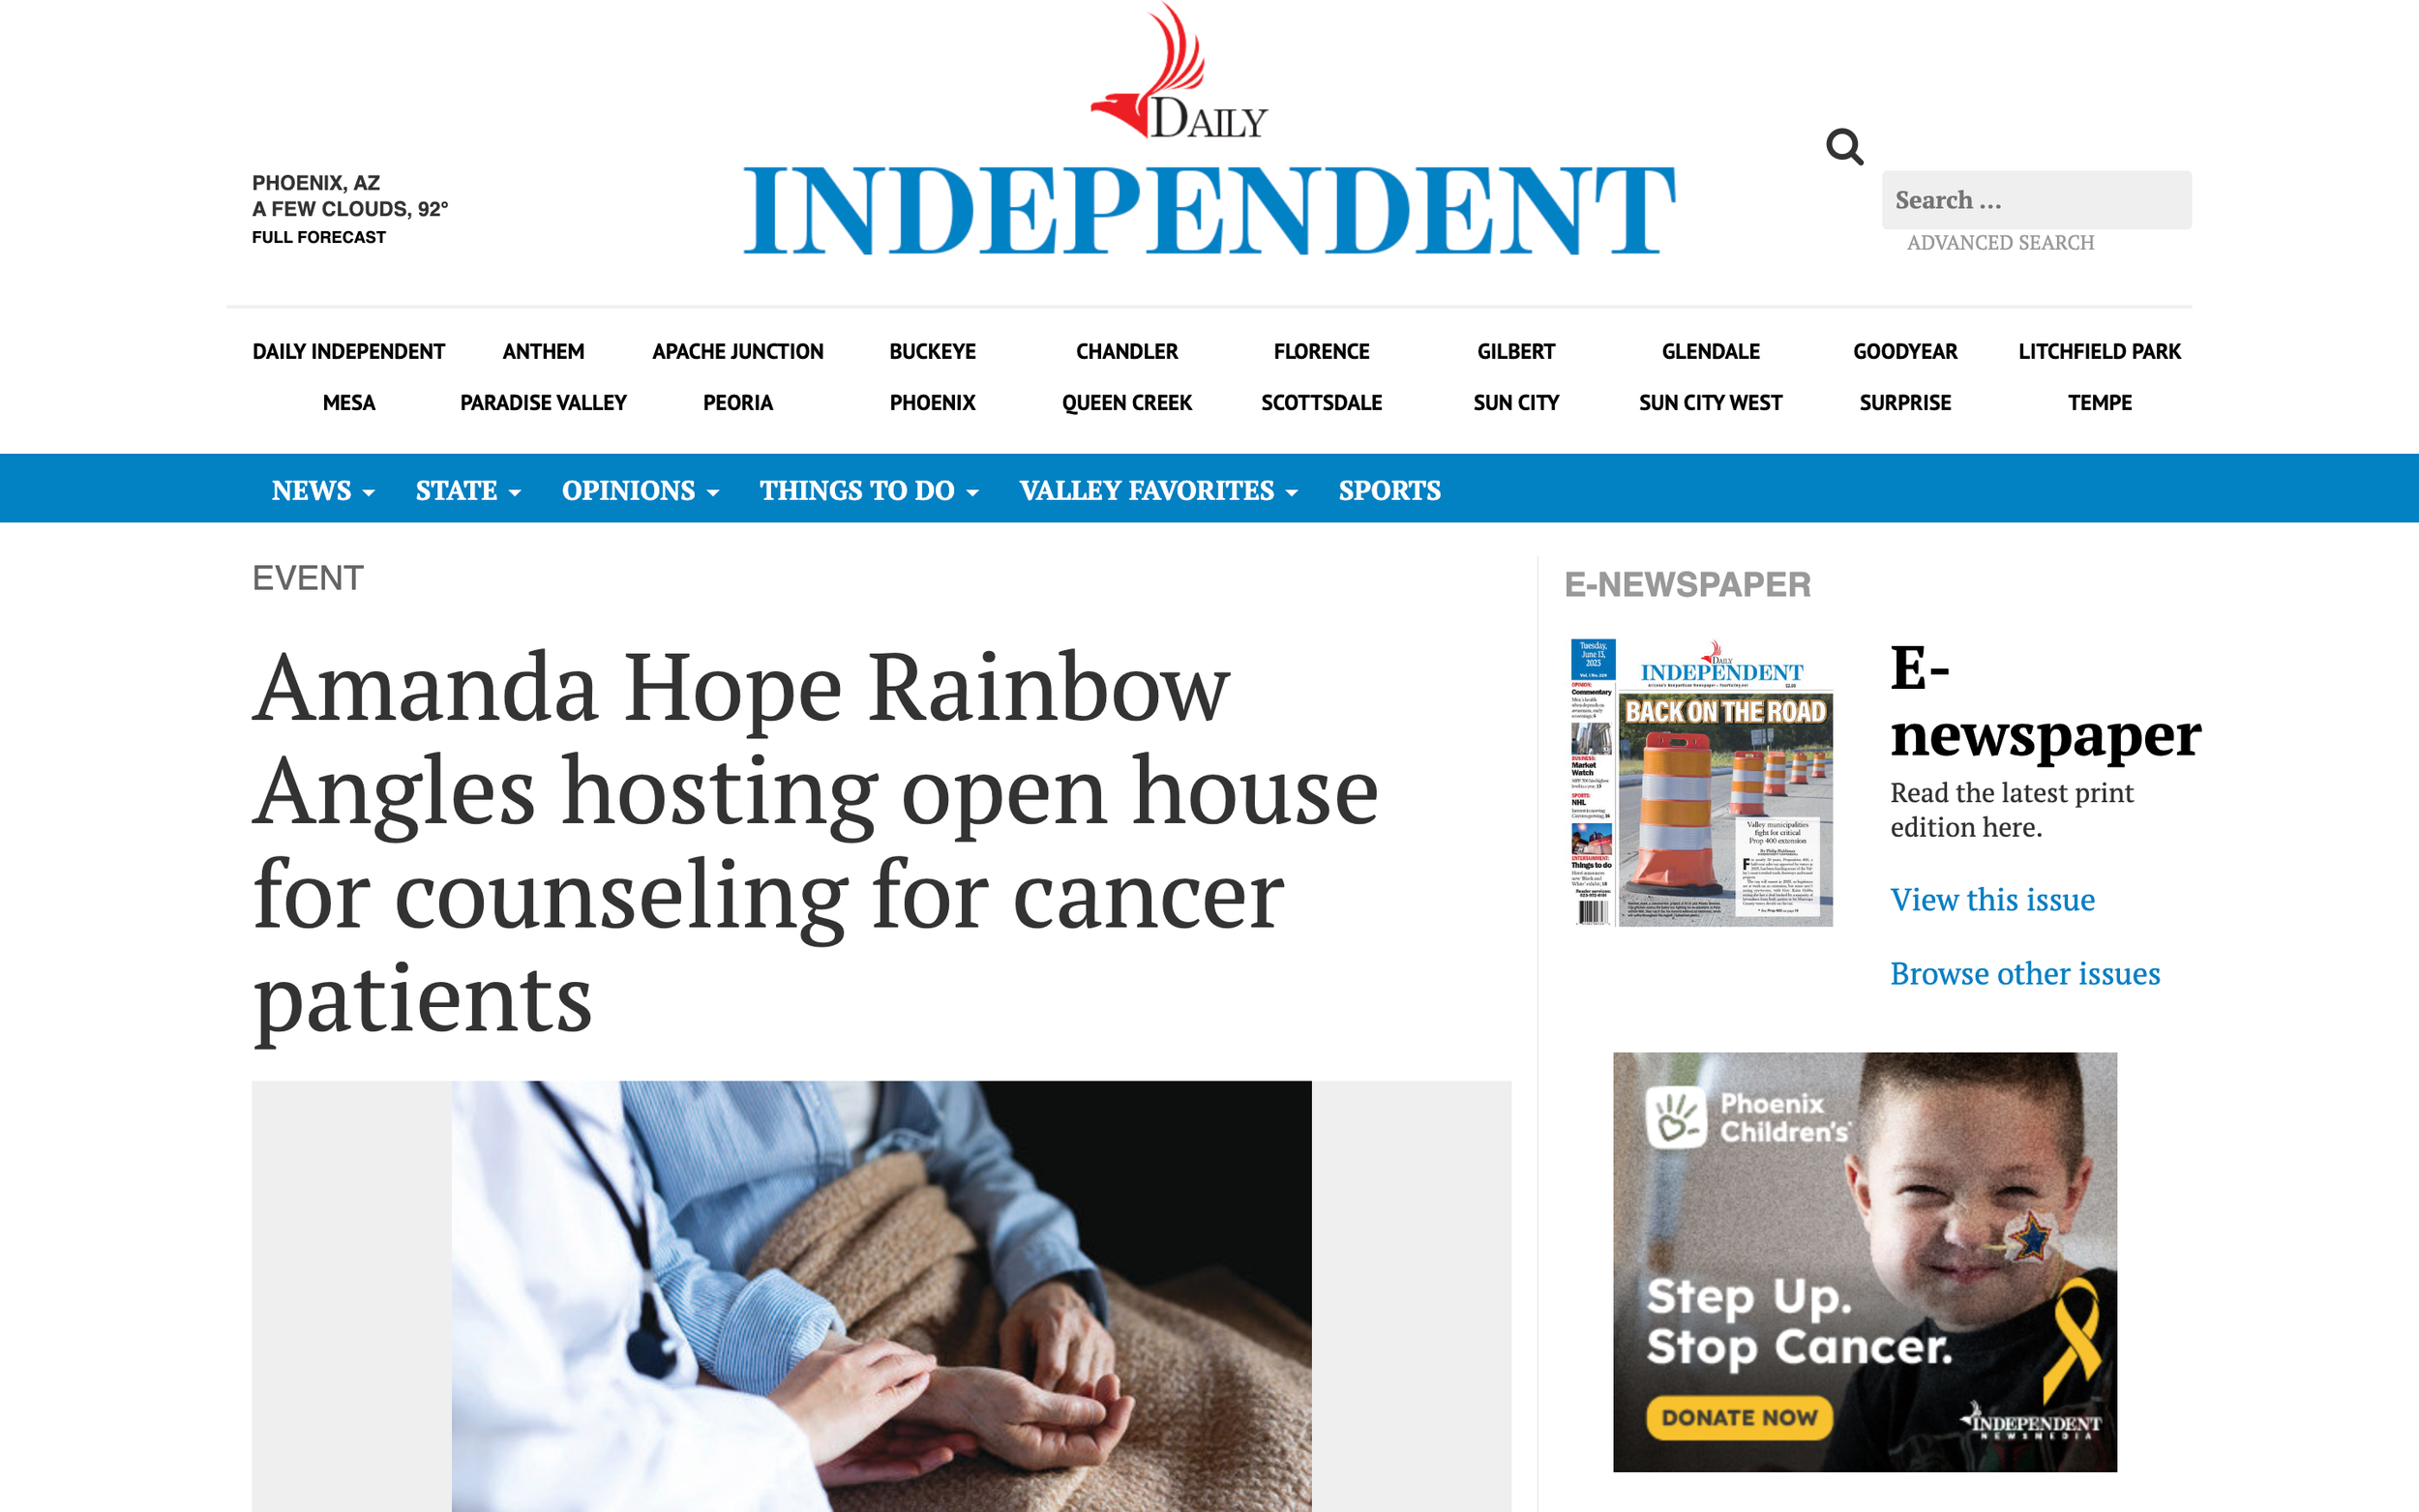 Daily Independent: Amanda Hope Rainbow Angles hosting open house for counseling for cancer patients (Copy)